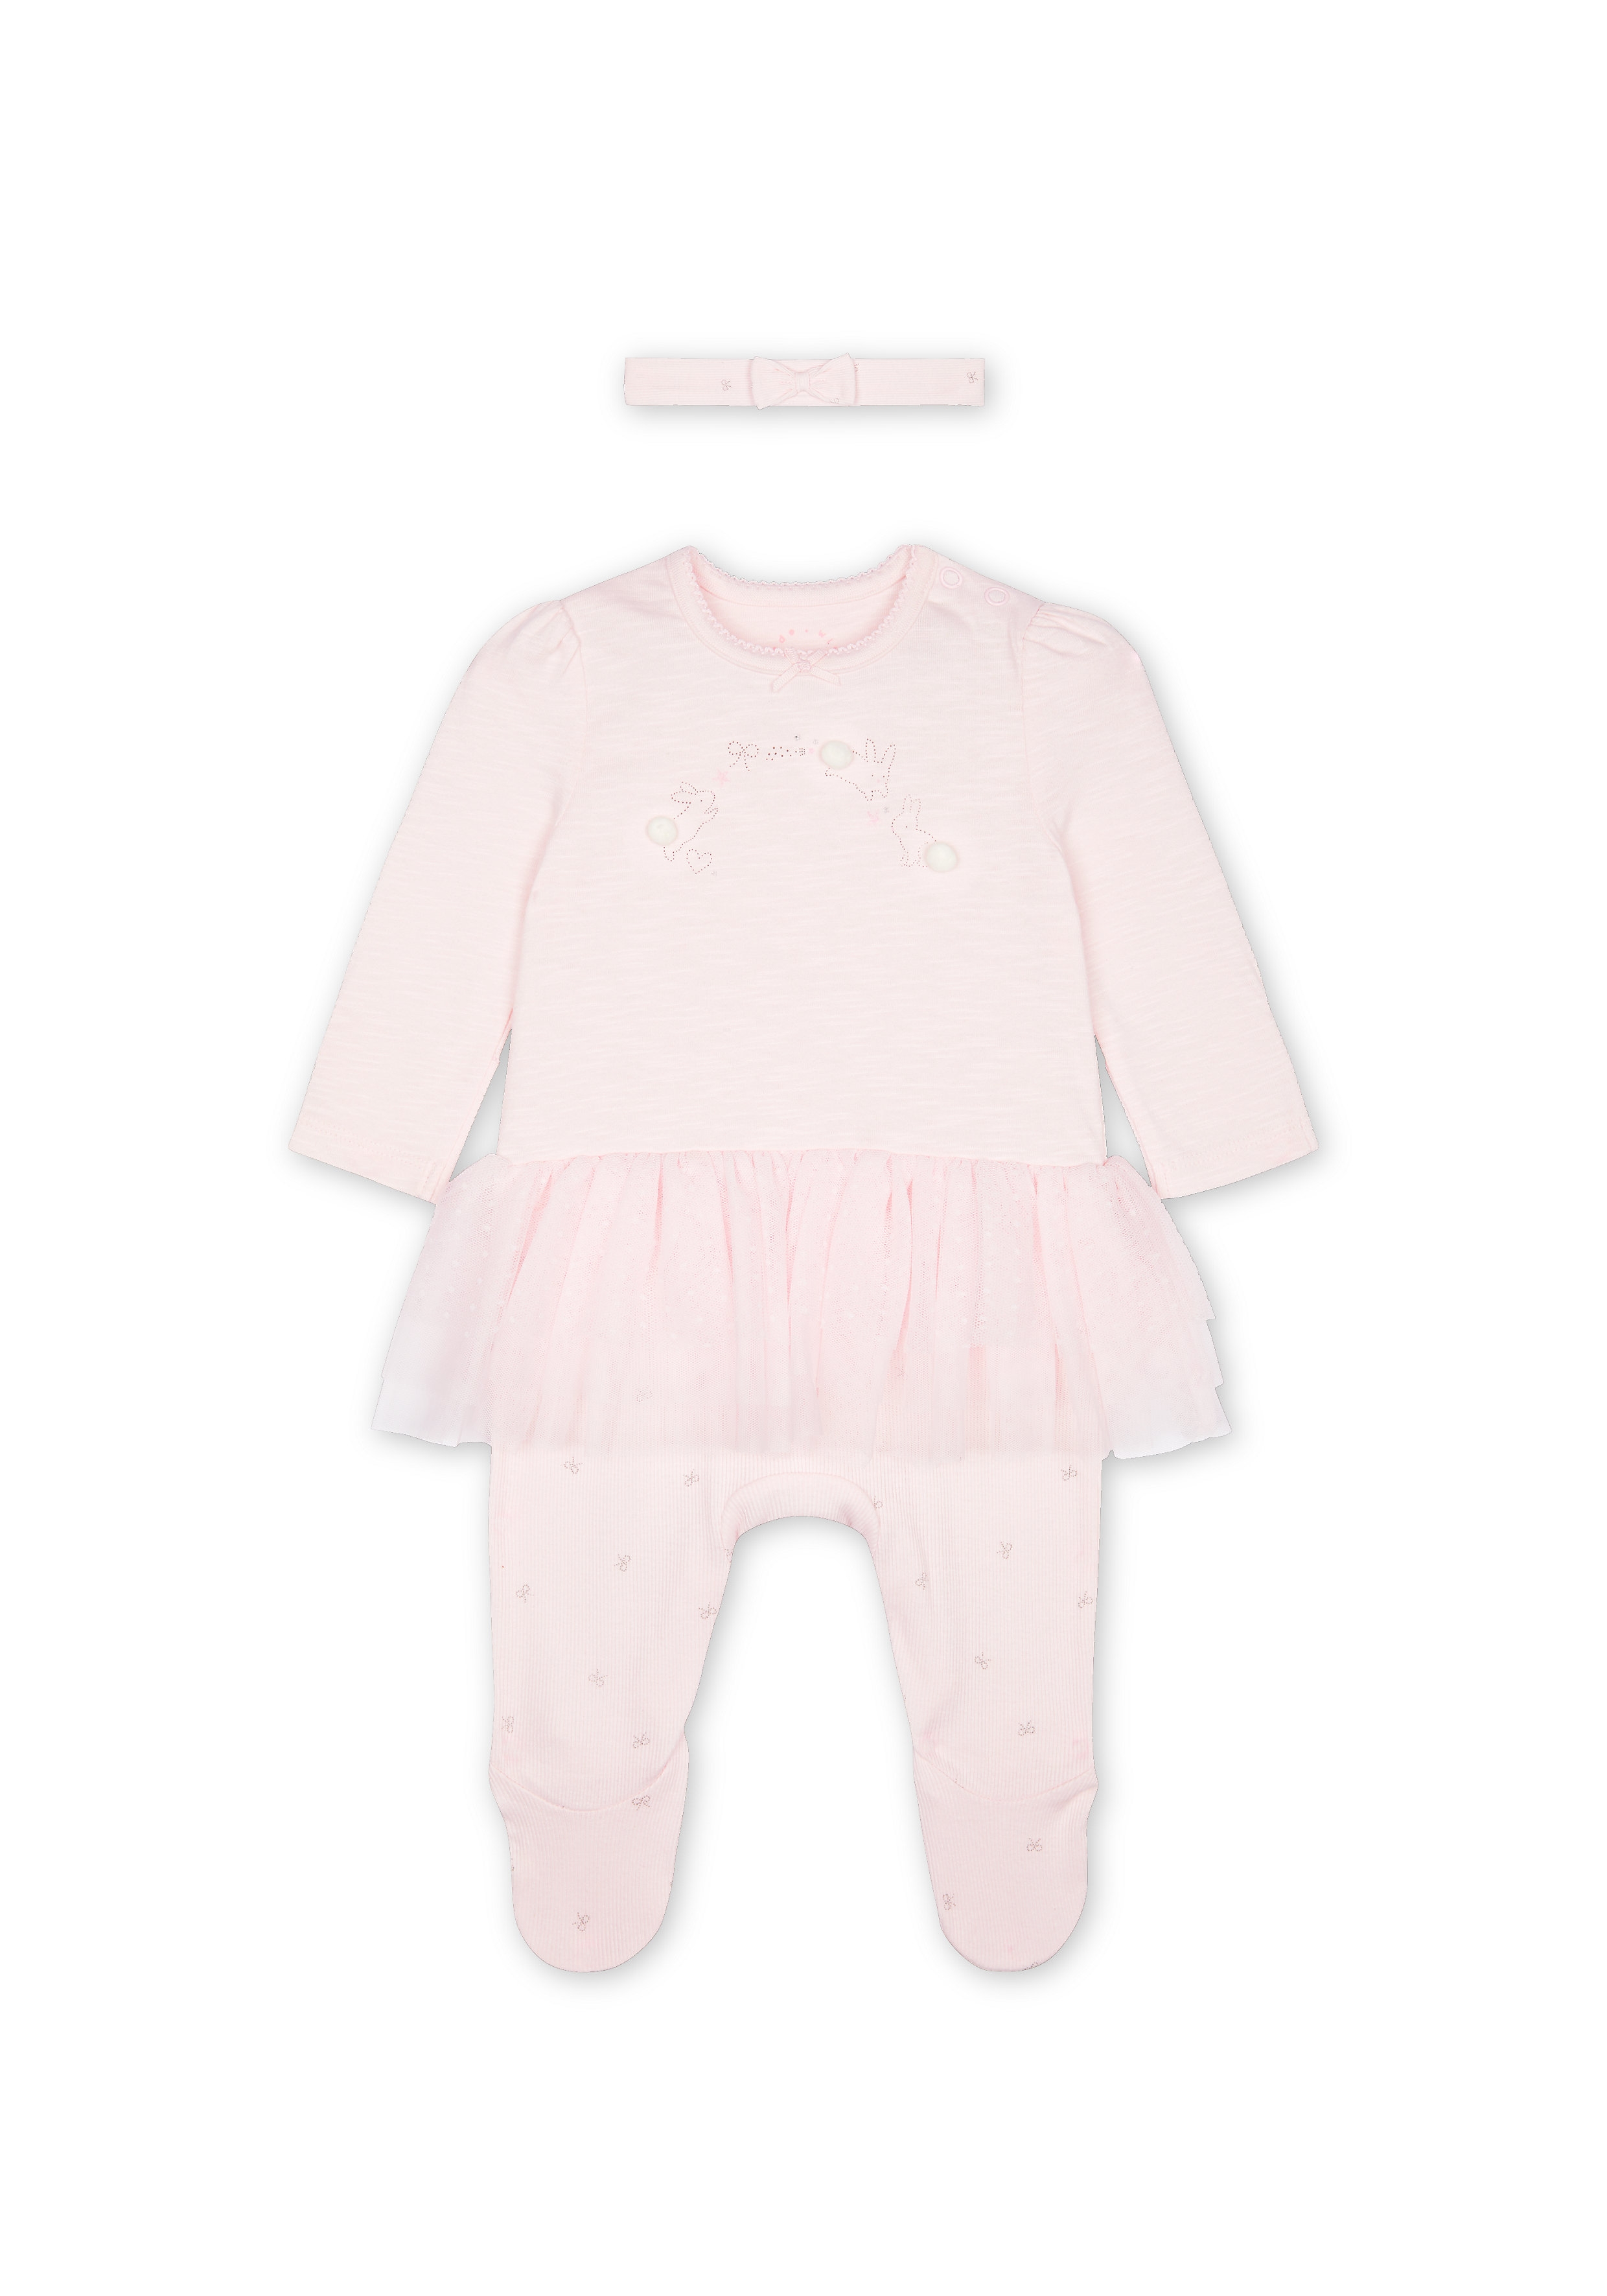 Mothercare | Girls Full Sleeves Frill Romper With Headband - Pink